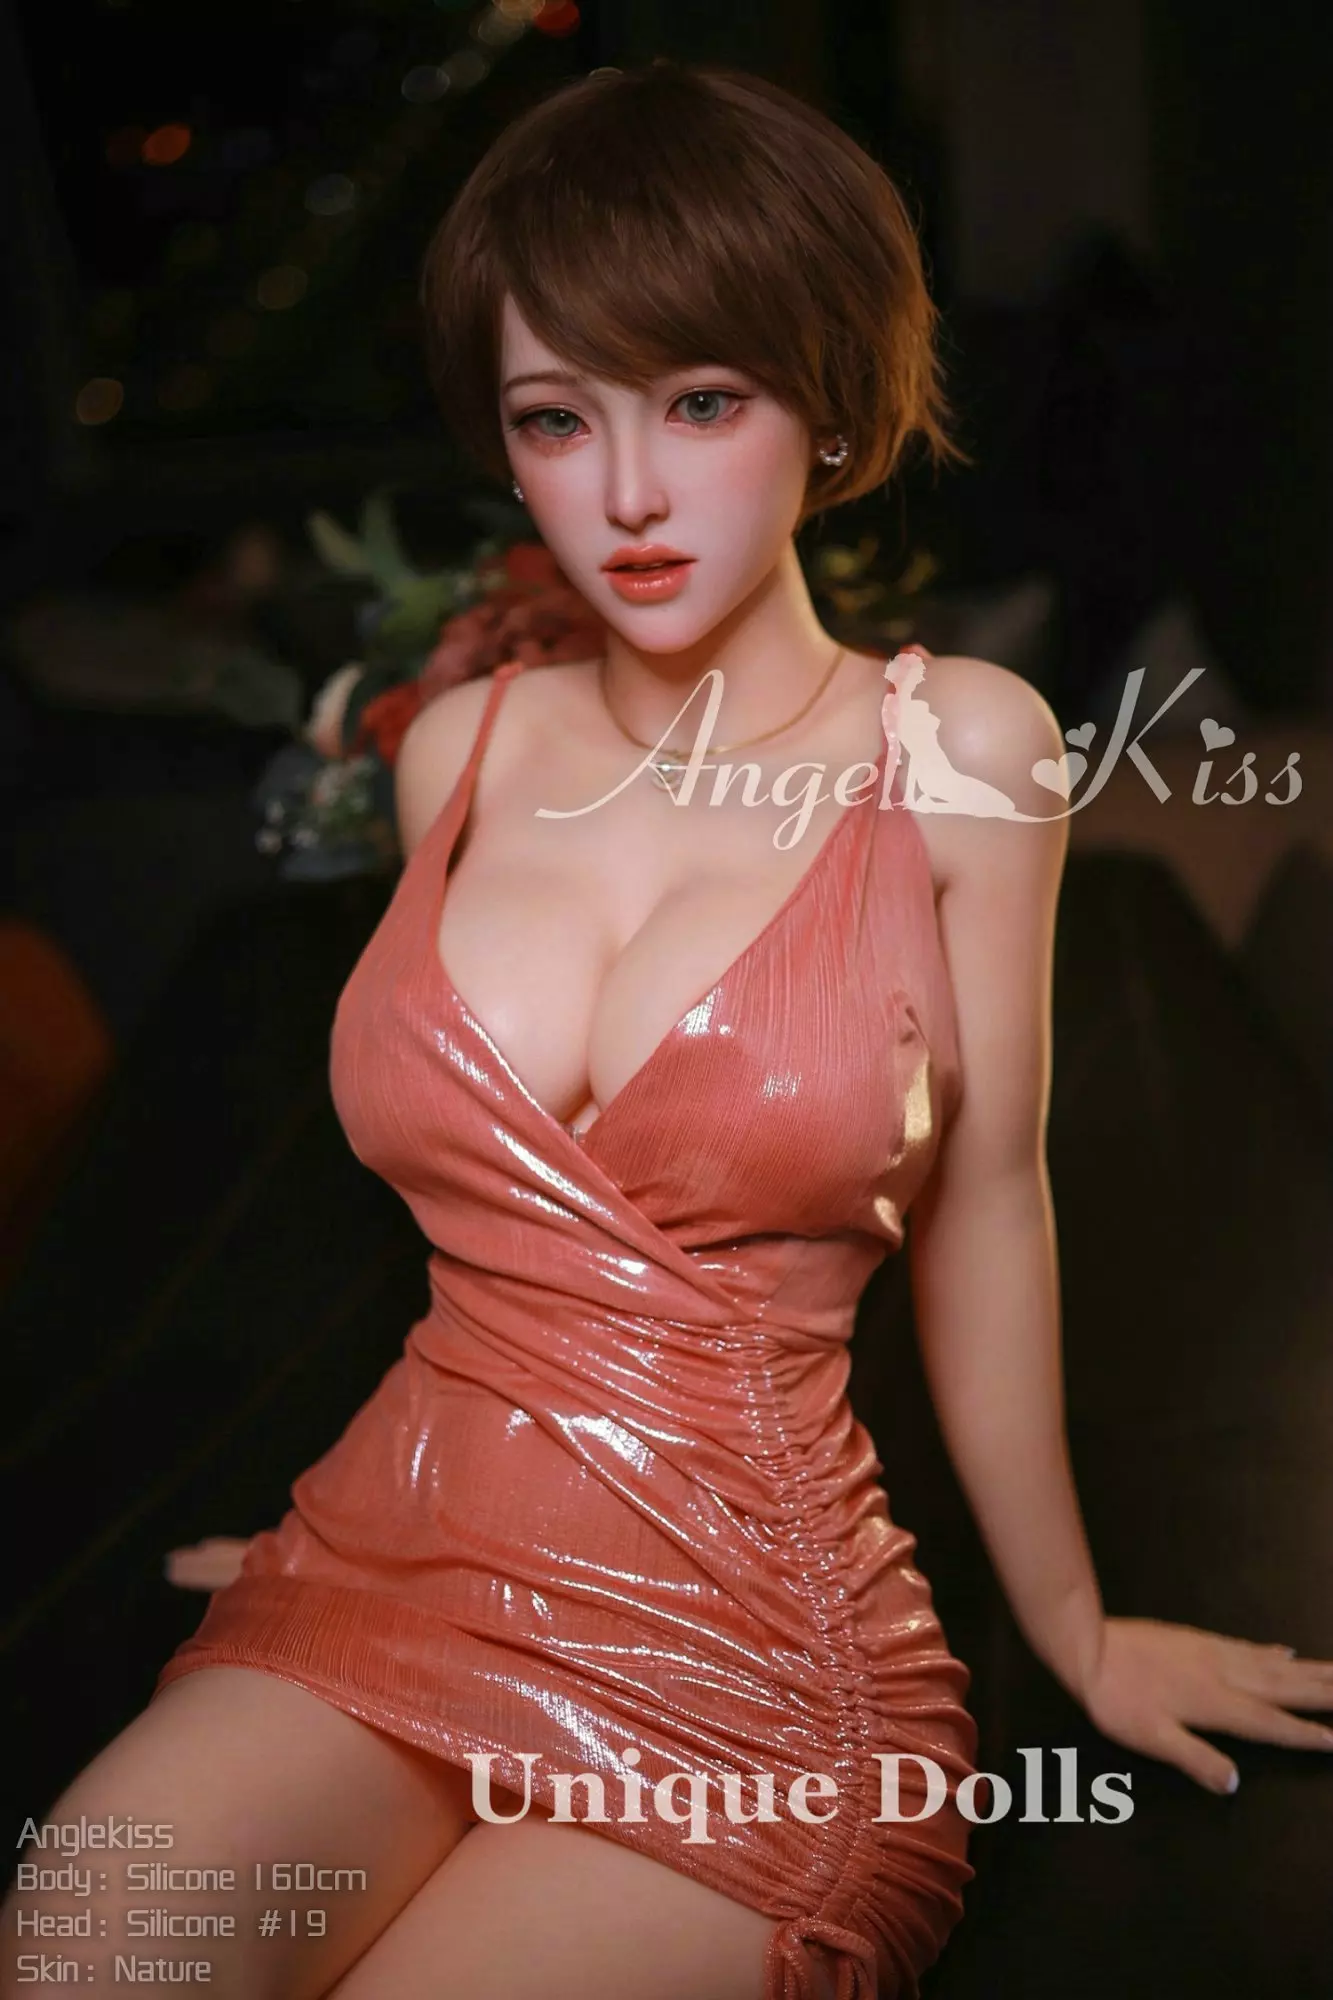 AK 160cm Asian Silicone sex doll with Head#LS19